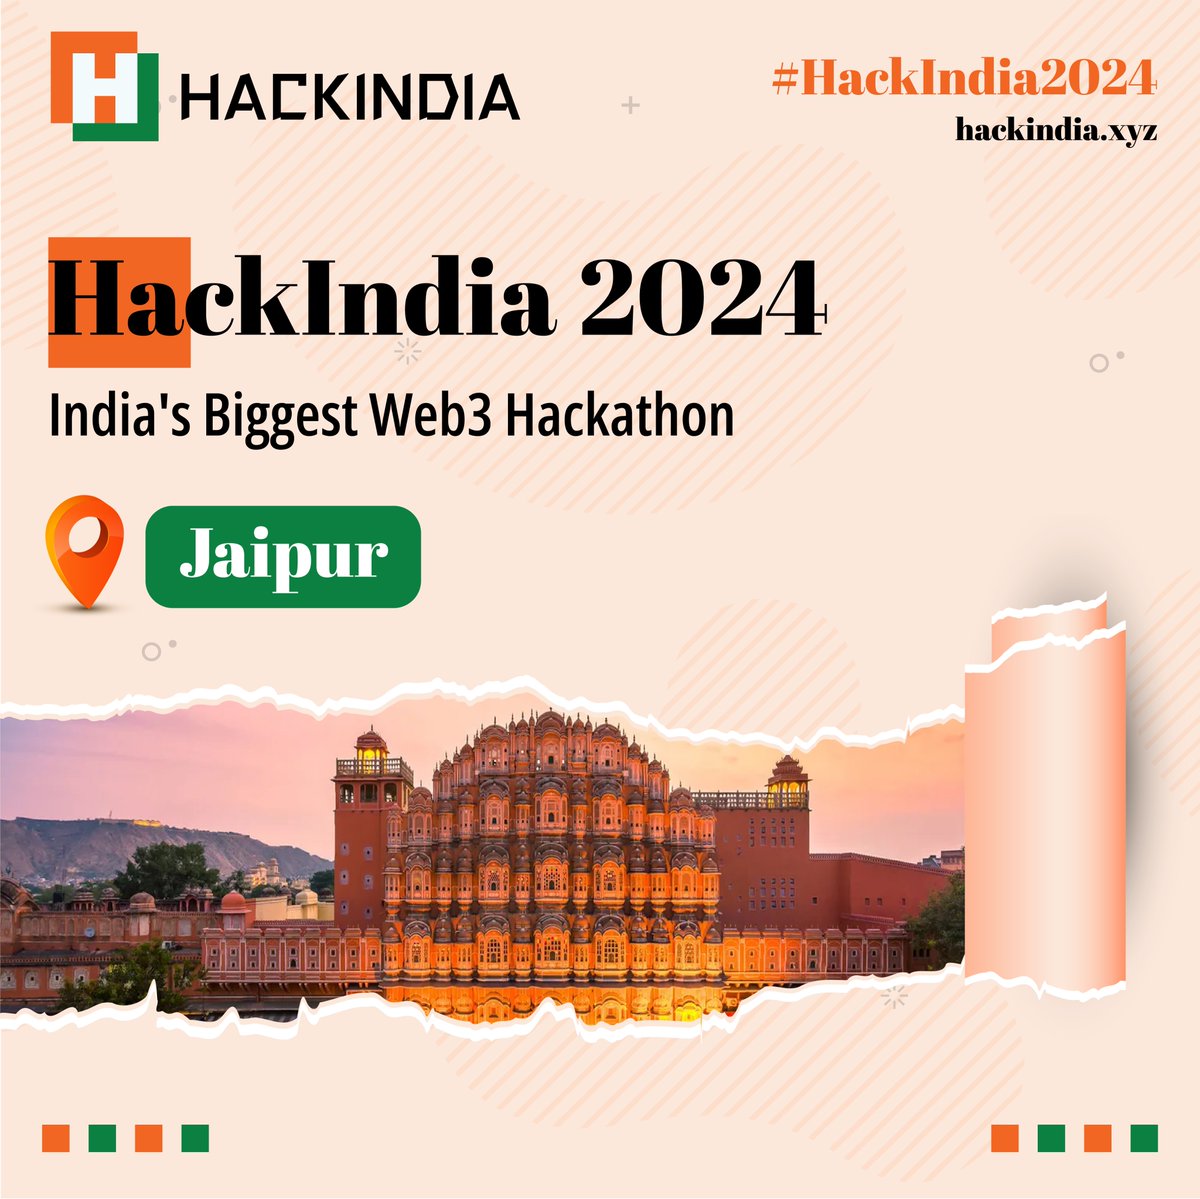 Get ready, Jaipur! Spark 2/7 of #HackIndia2024 is set to be in your city. Stay tuned for more details on dates and venue. Know more and register now: hackindia.xyz #Hackathon #Web3Hackathon #HackIndia #Web3Innovation #Jaipur